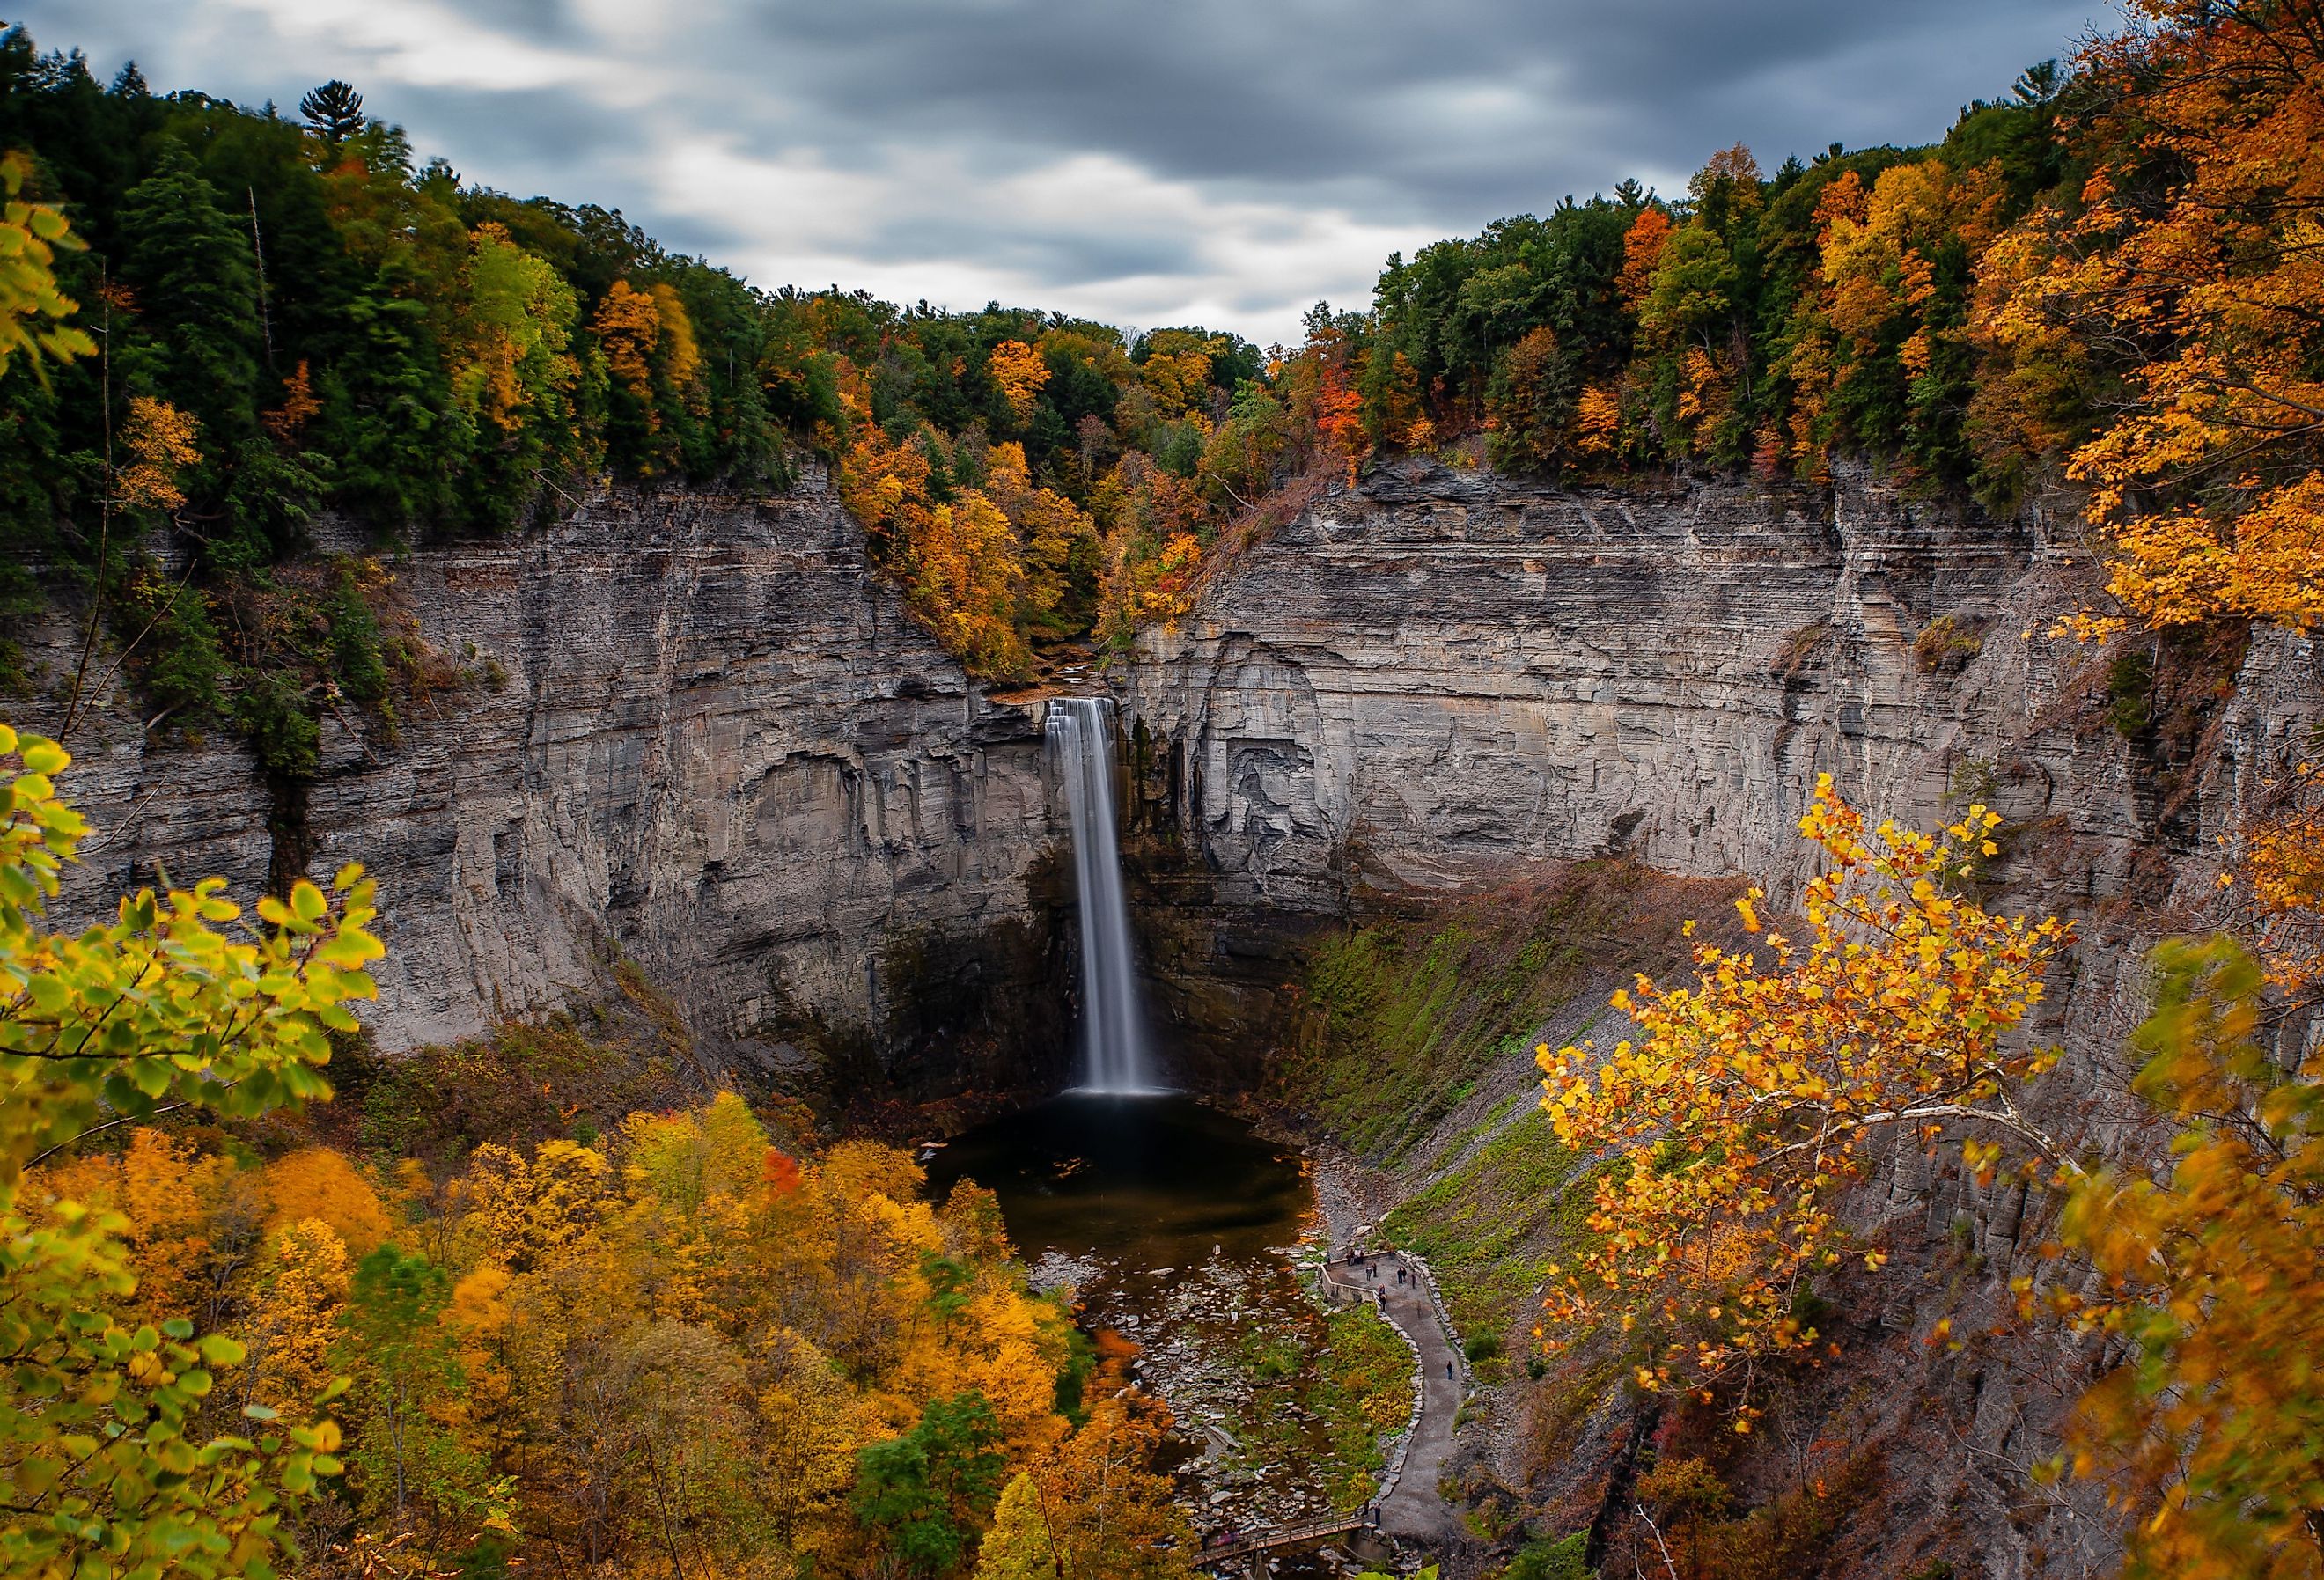 A scenic, autumn view of Taughannock Falls at Taughannock Falls State Park near Ithaca, New York.